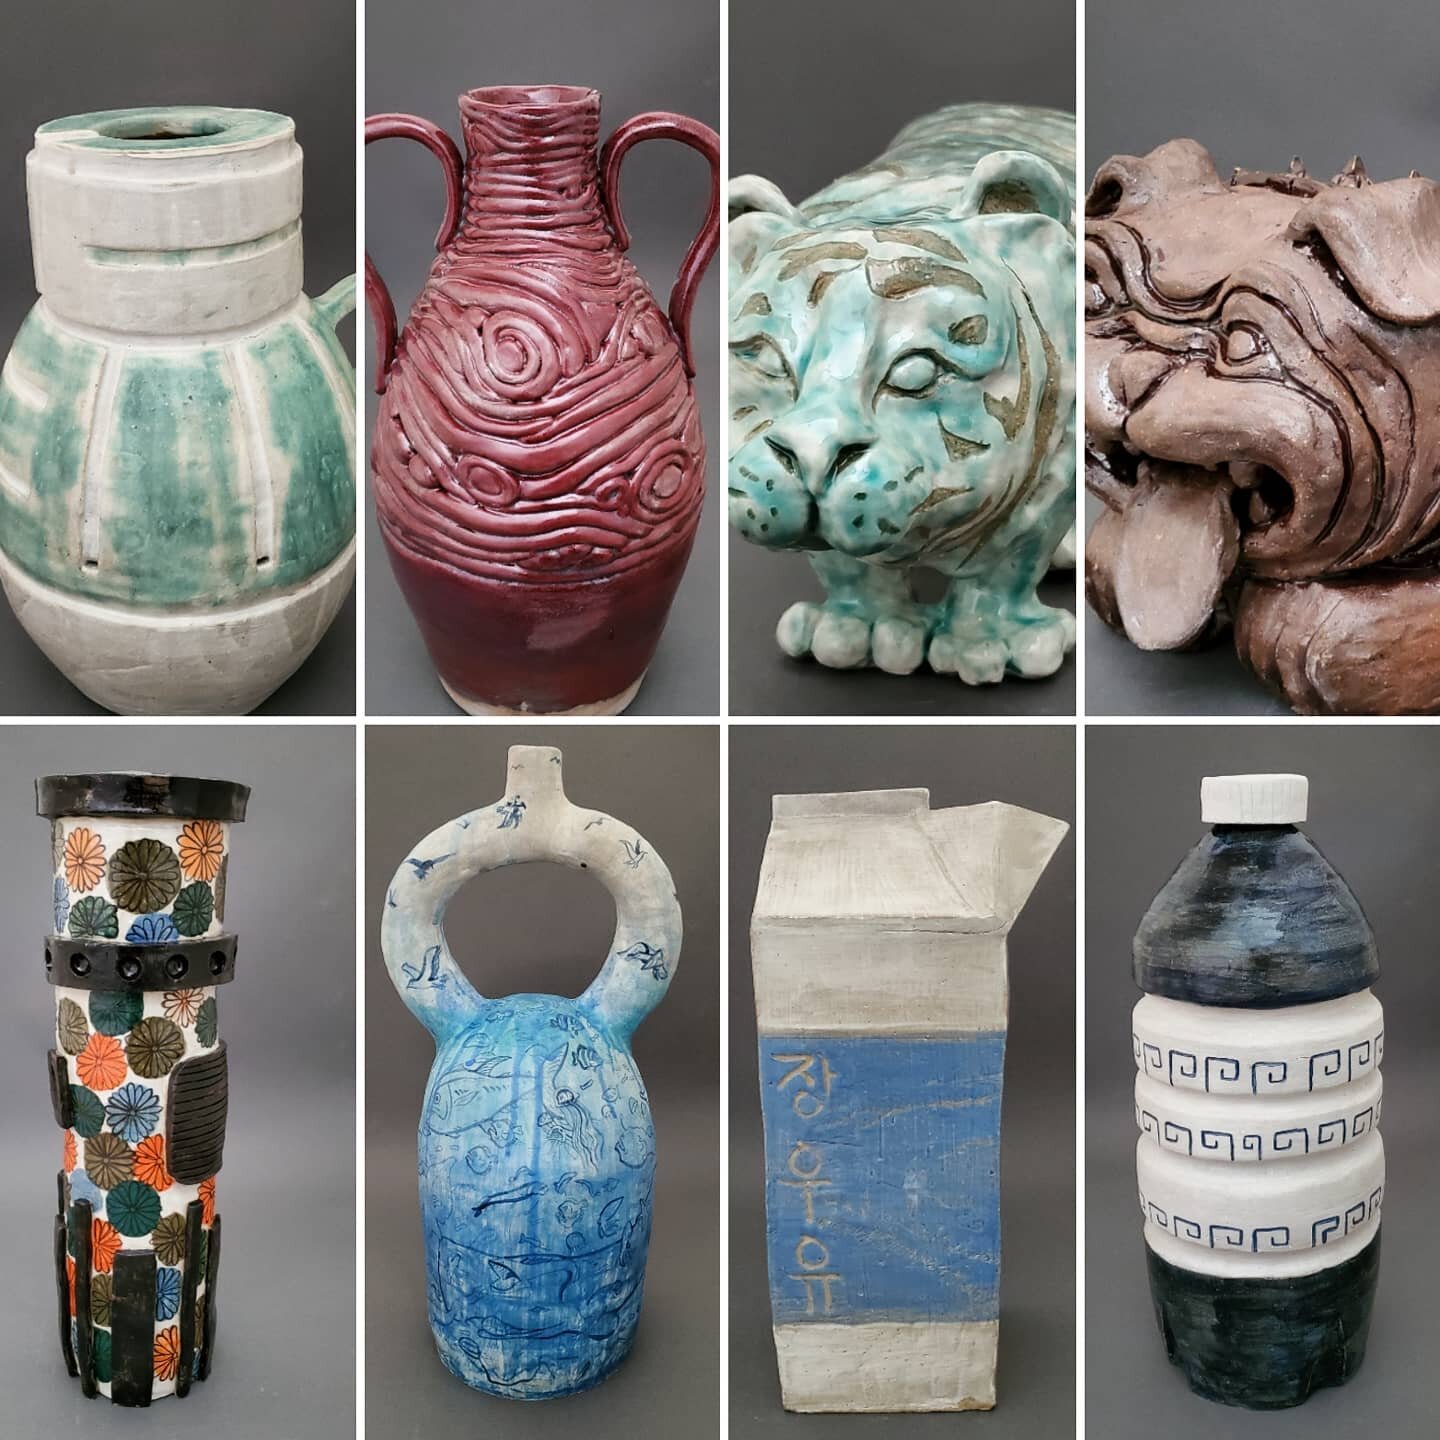 More snippets of student work from this 2021 spring semester at UGA

My students' second assignment was to make an 18 inch coil pot with both historical and contemporary references.  I am so impressed and proud and am continually reminded how much I 